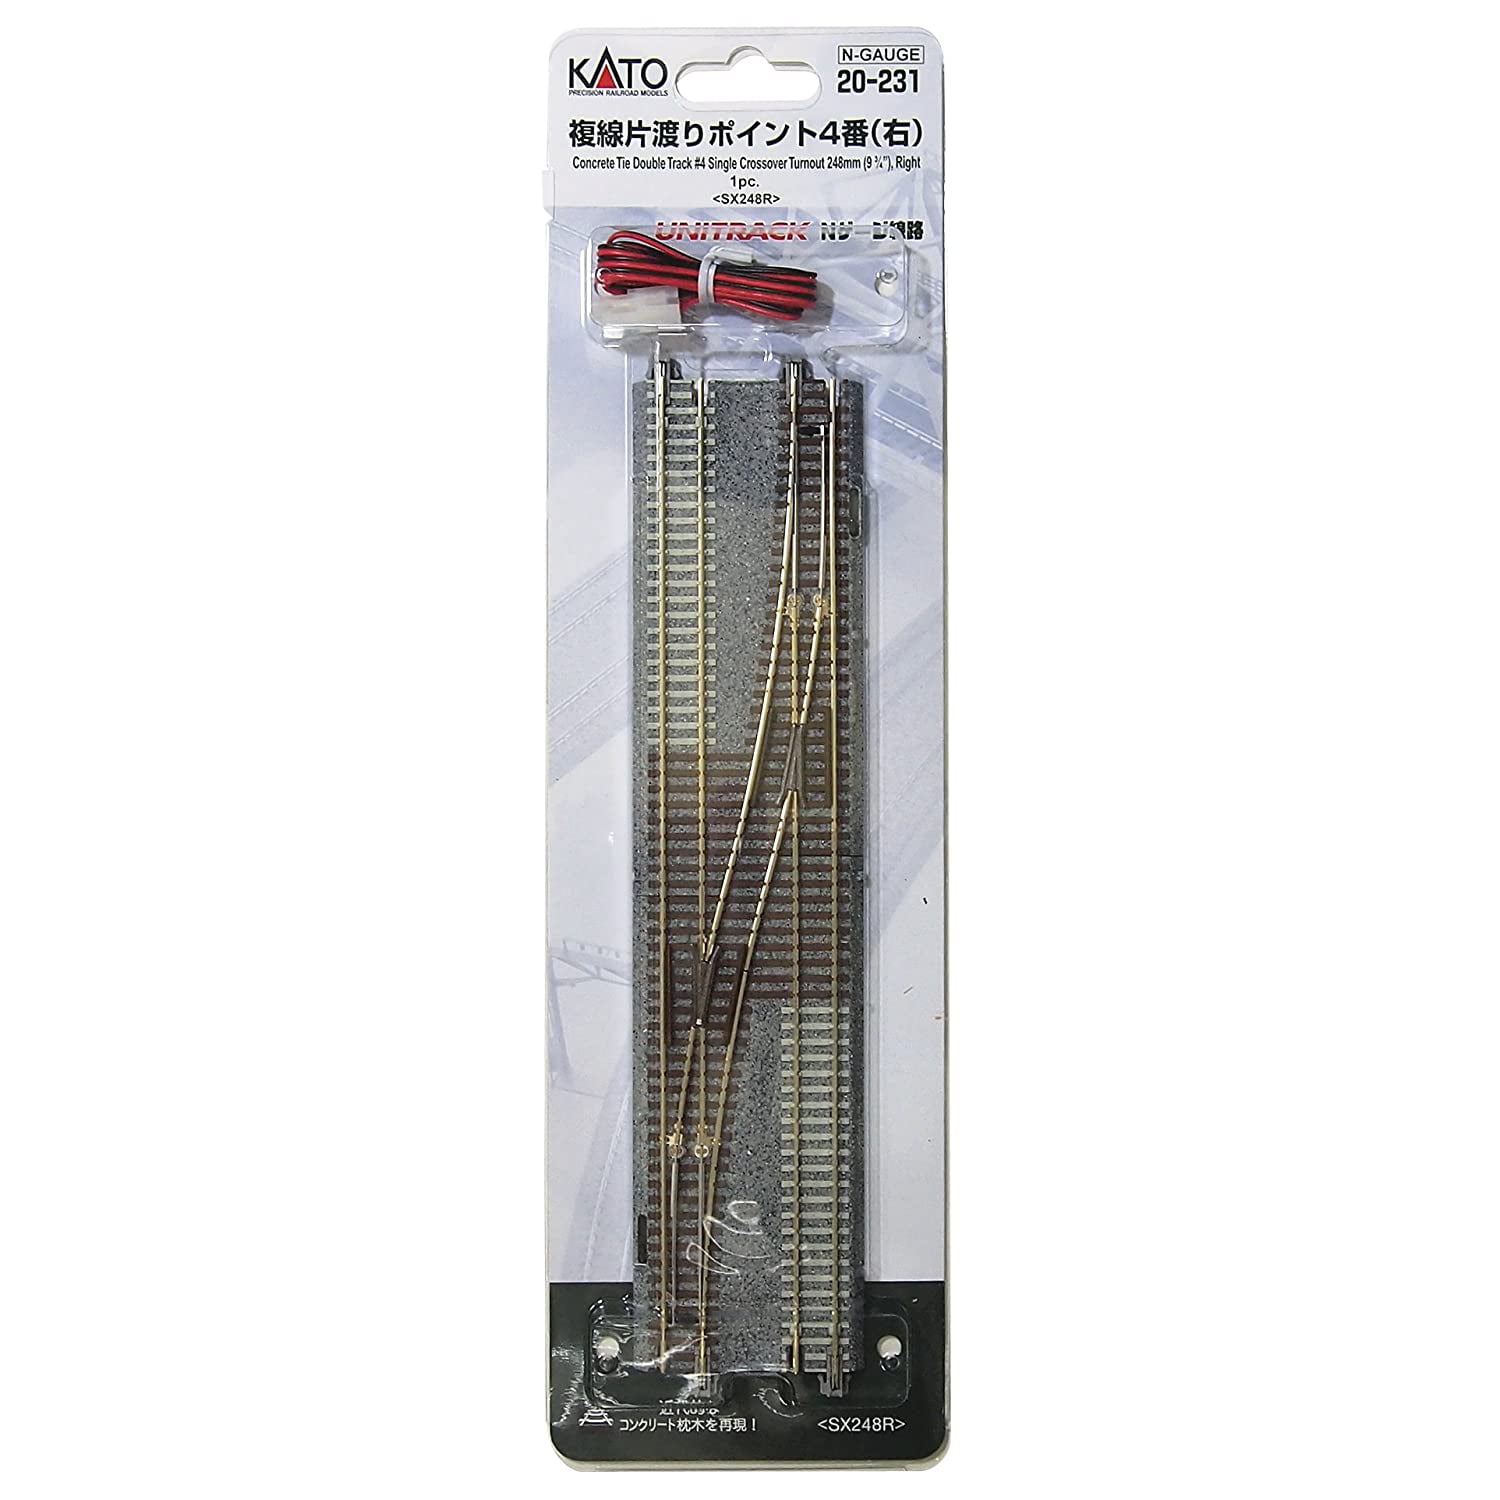 KATO 24846 Crossing Gate Extension Cord N Scale for sale online 